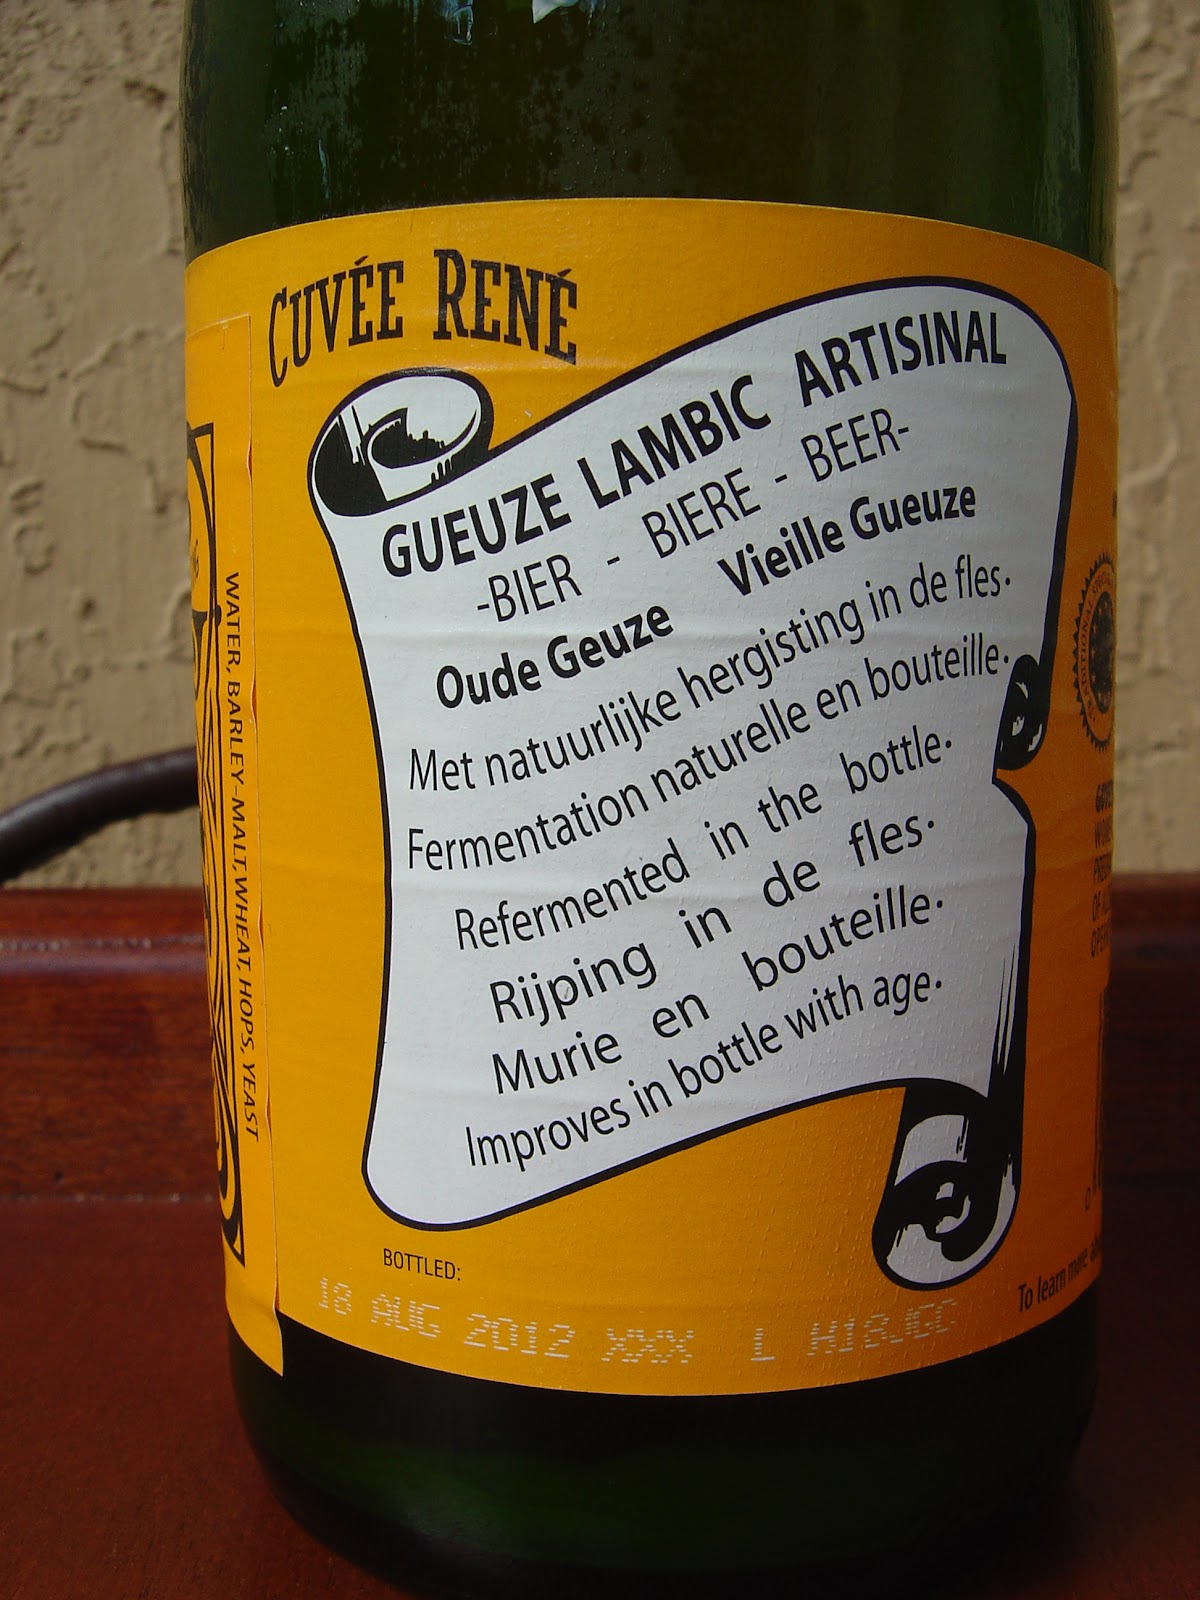 Daily Beer Review Cuvée René Gueuze Lambic